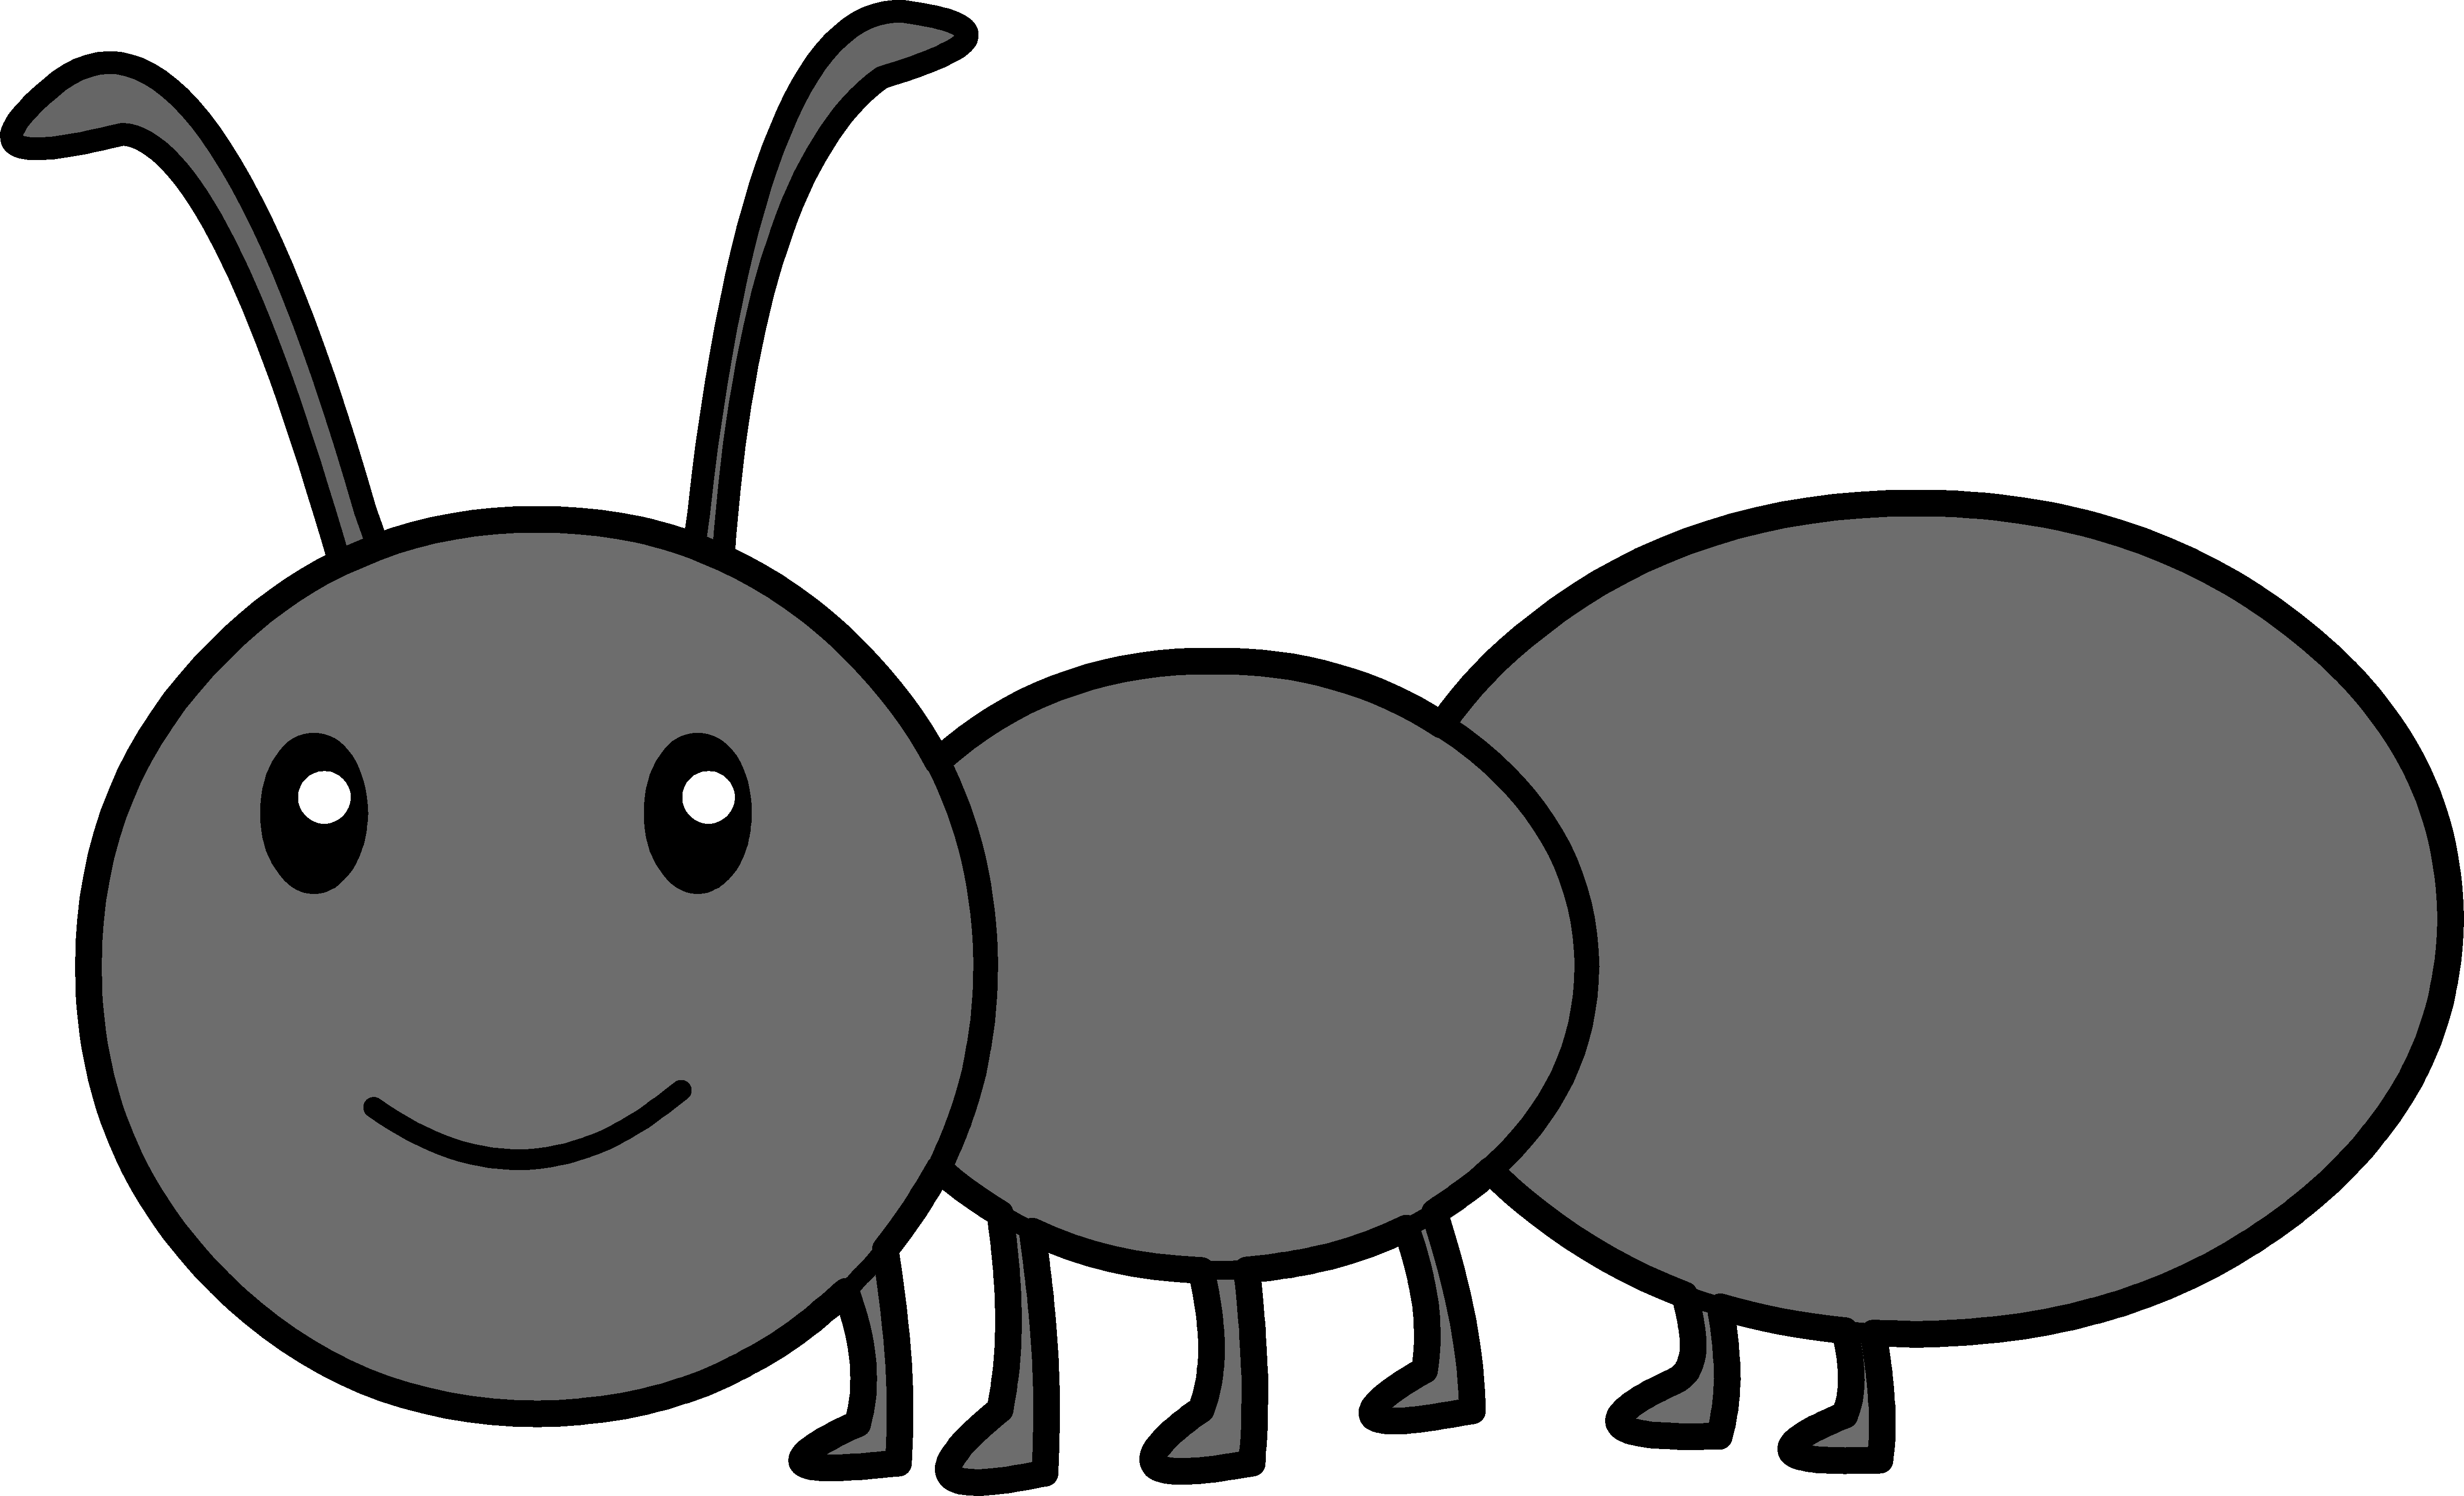 Clipart of an ant